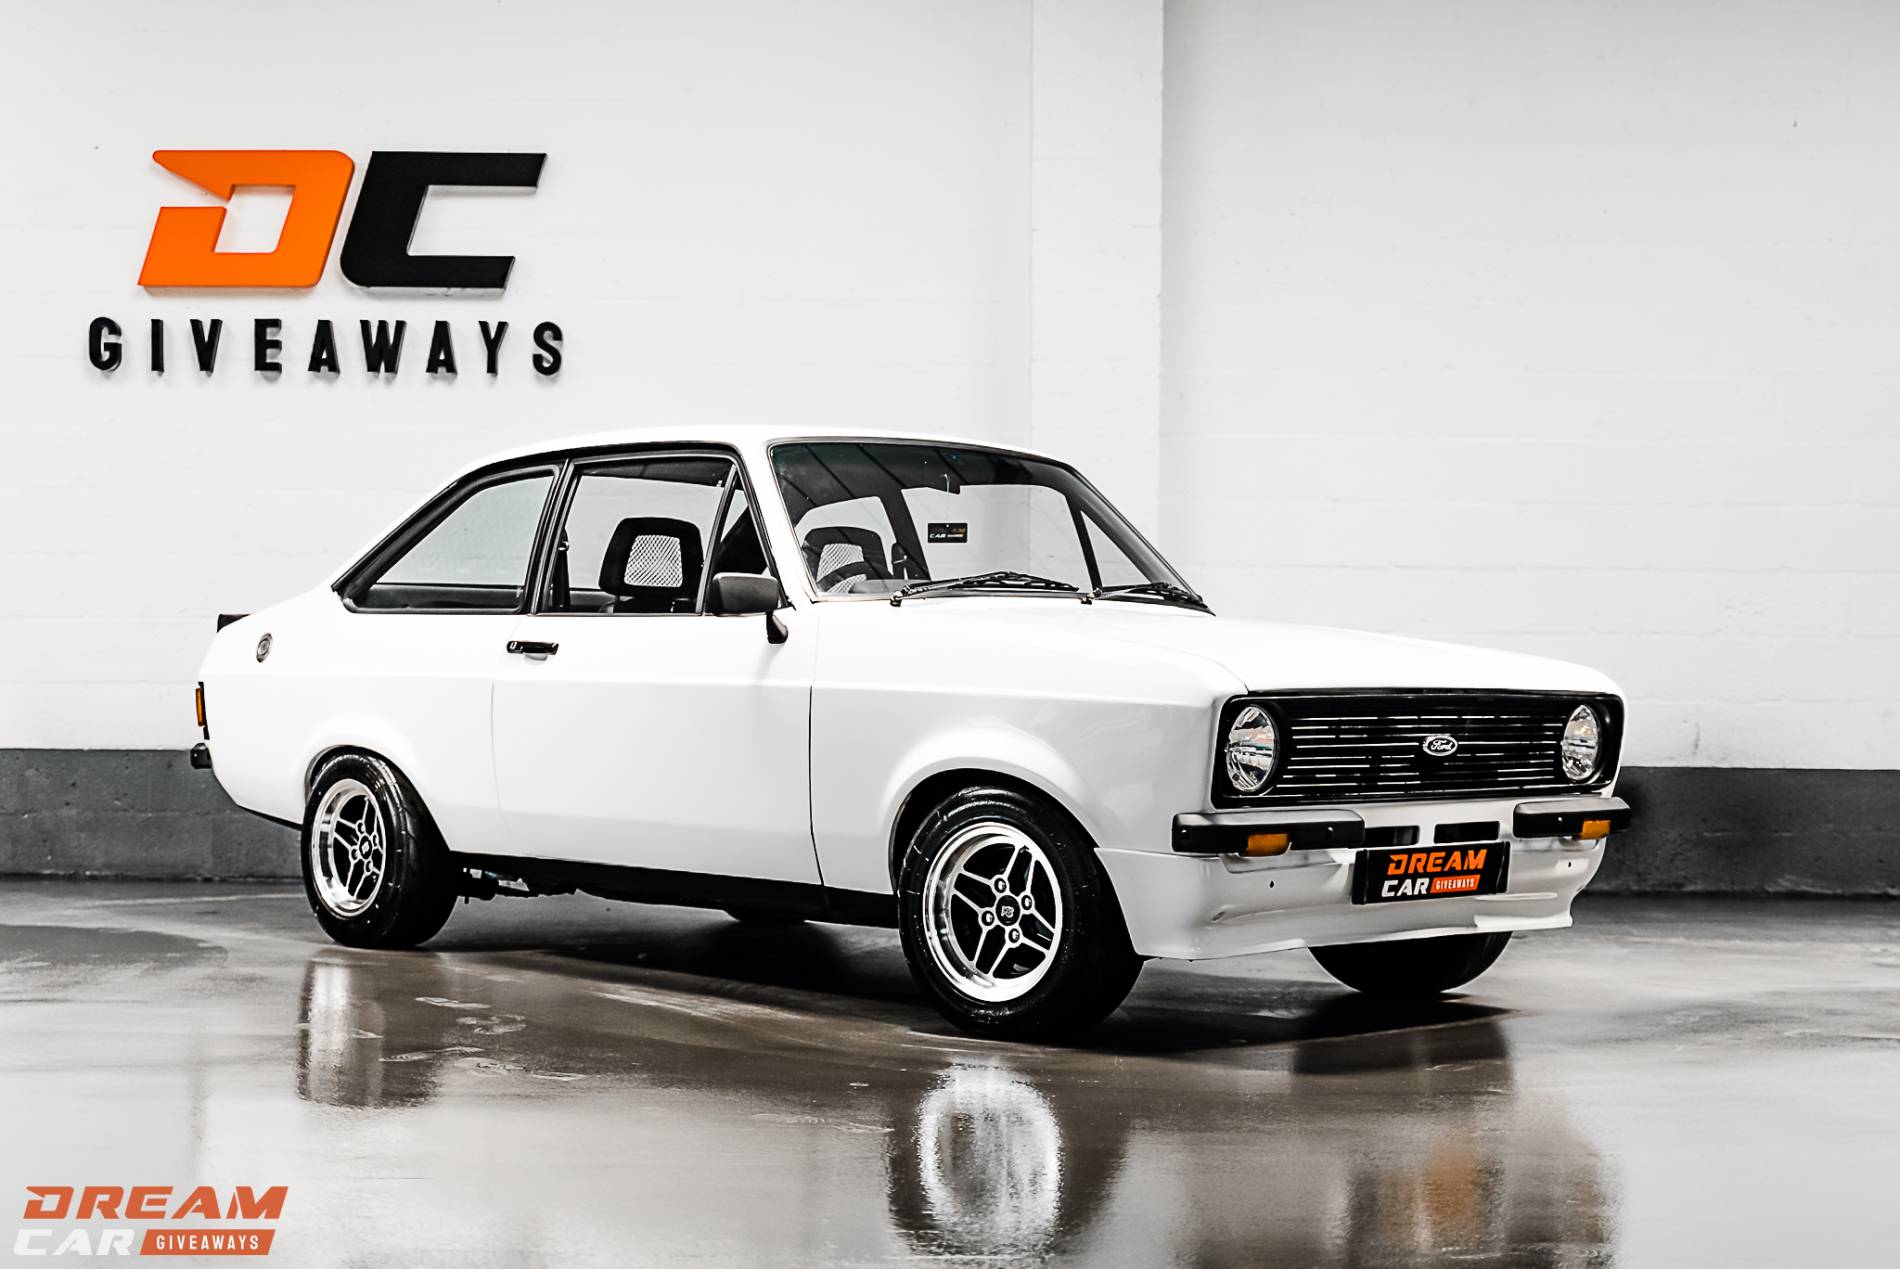 214HP Ford Escort MK2 - Only 1899 Entries